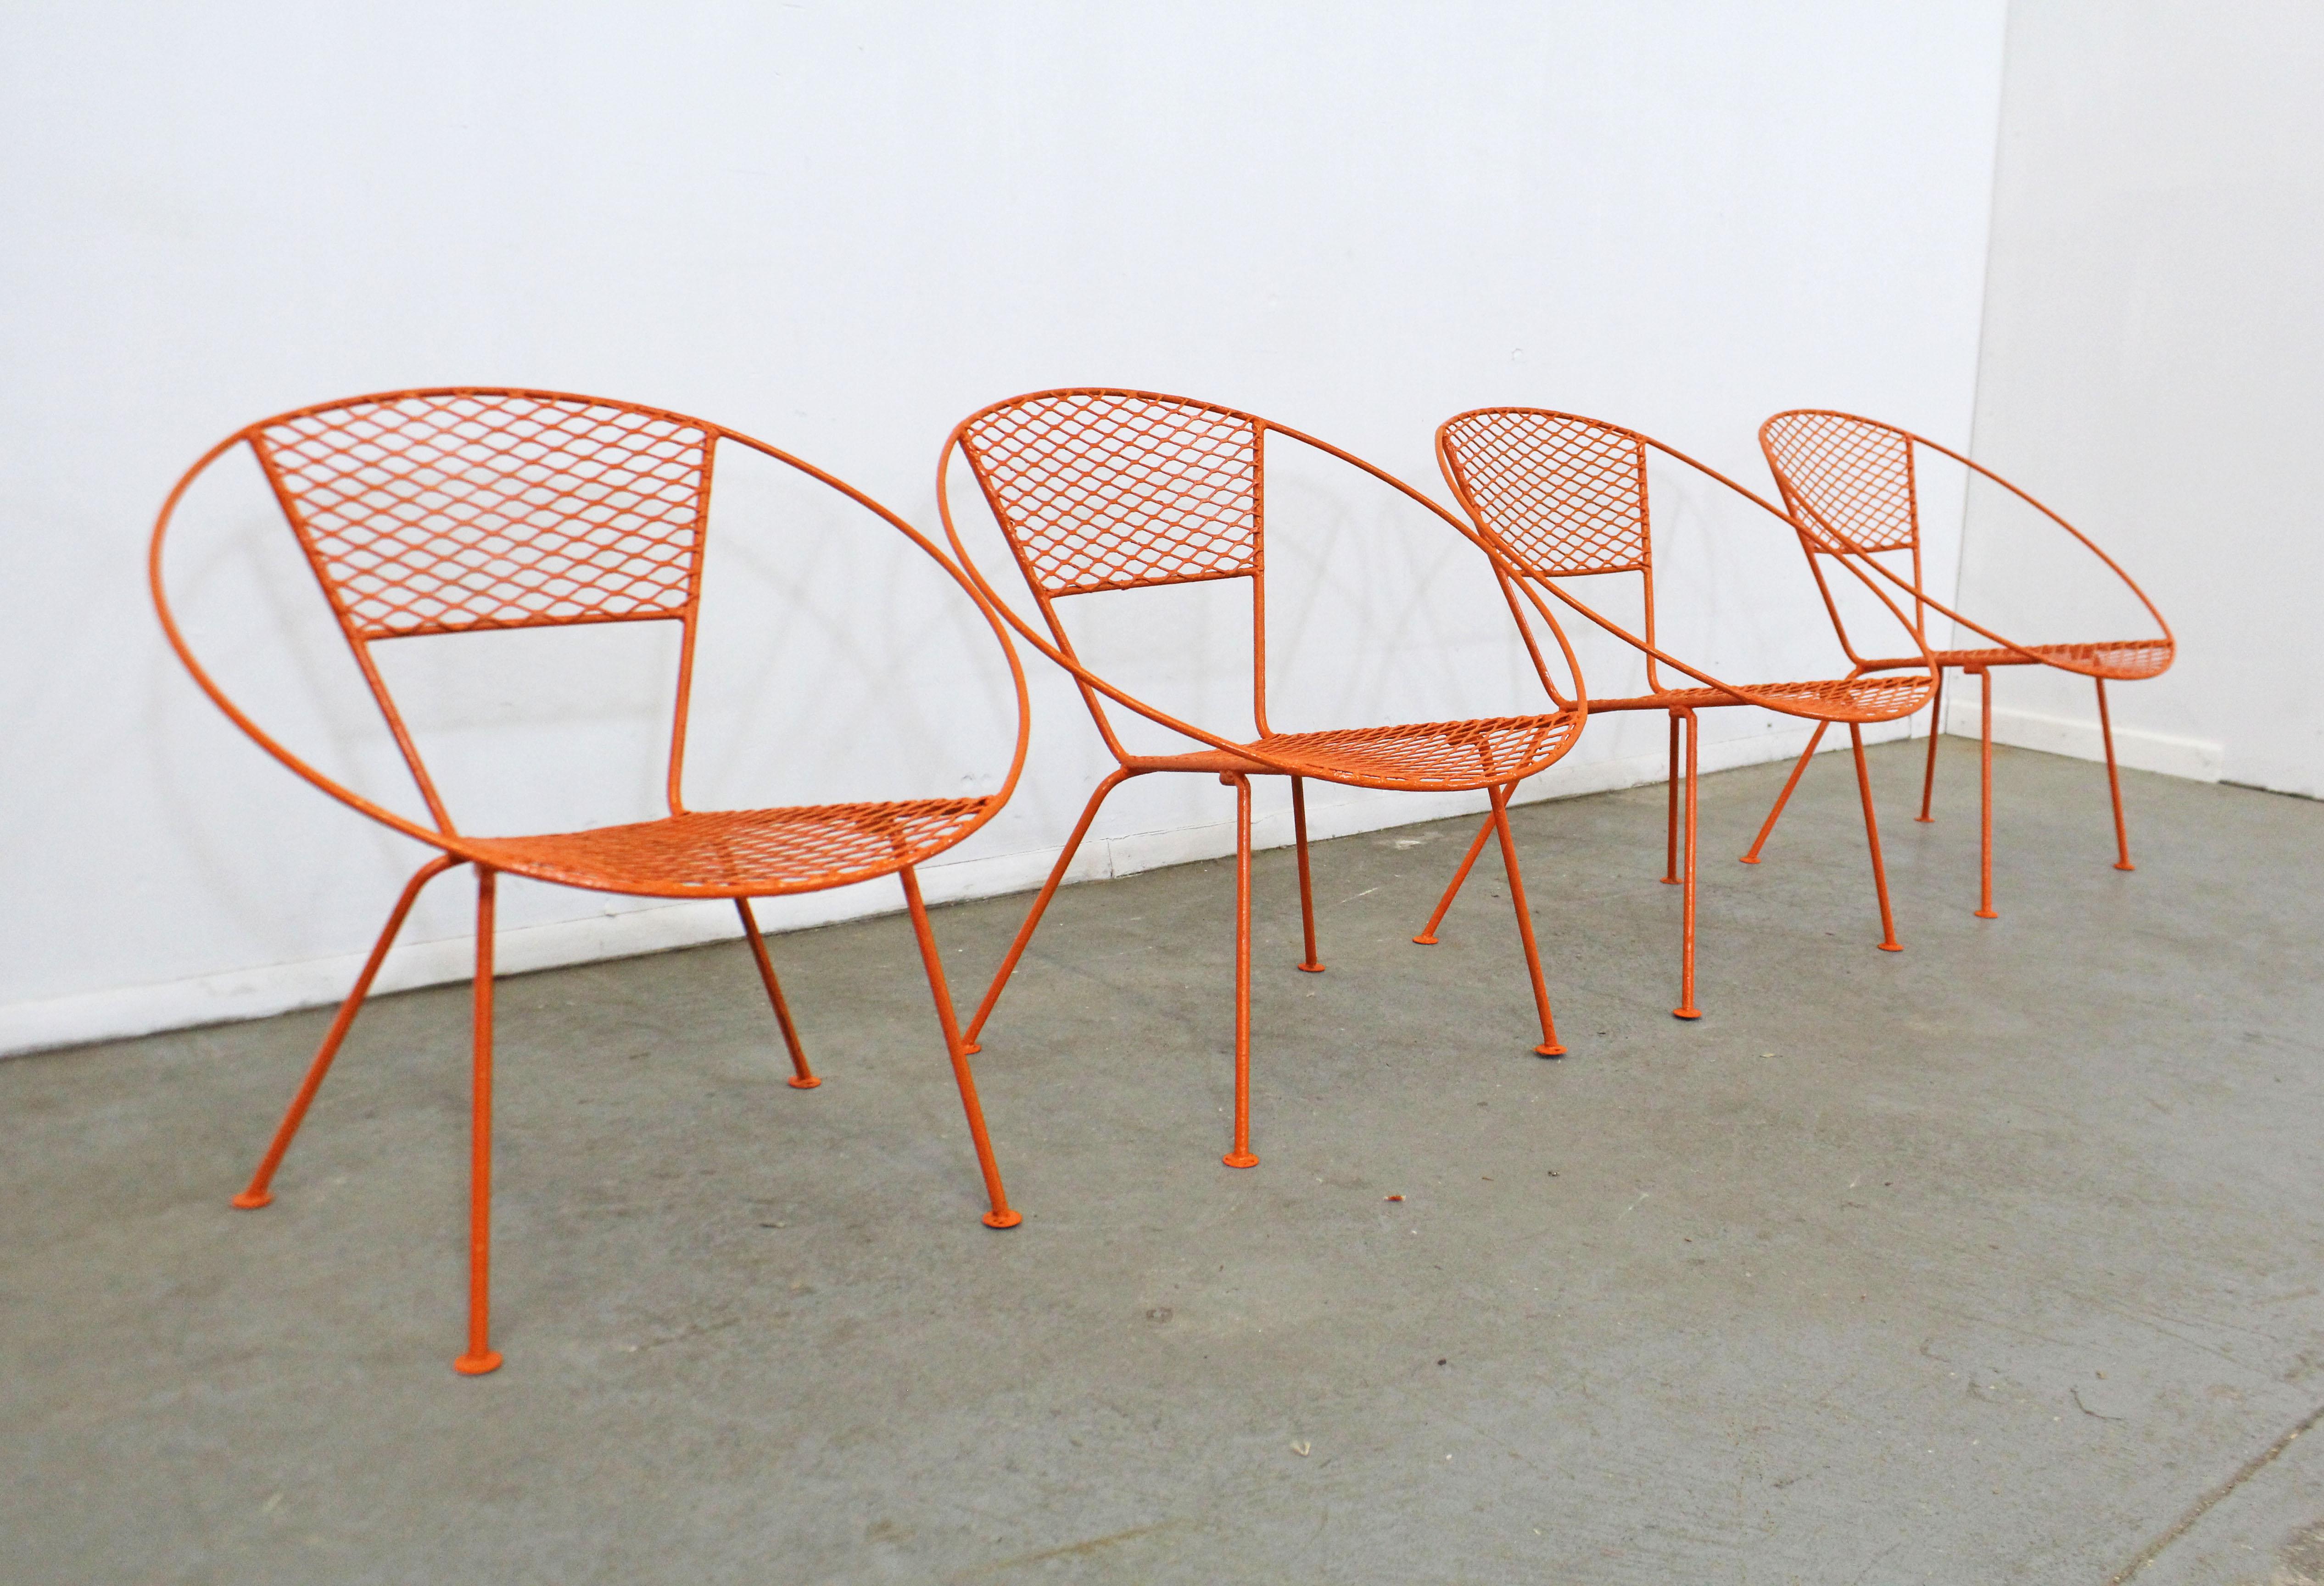 What a find. Offered is a set of 4 vintage Mid-Century Modern outdoor circle chairs. Includes four metal chairs with hoop mesh backs and seats that have been painted orange. The chairs are in good condition with minor surface wear and orange paint.